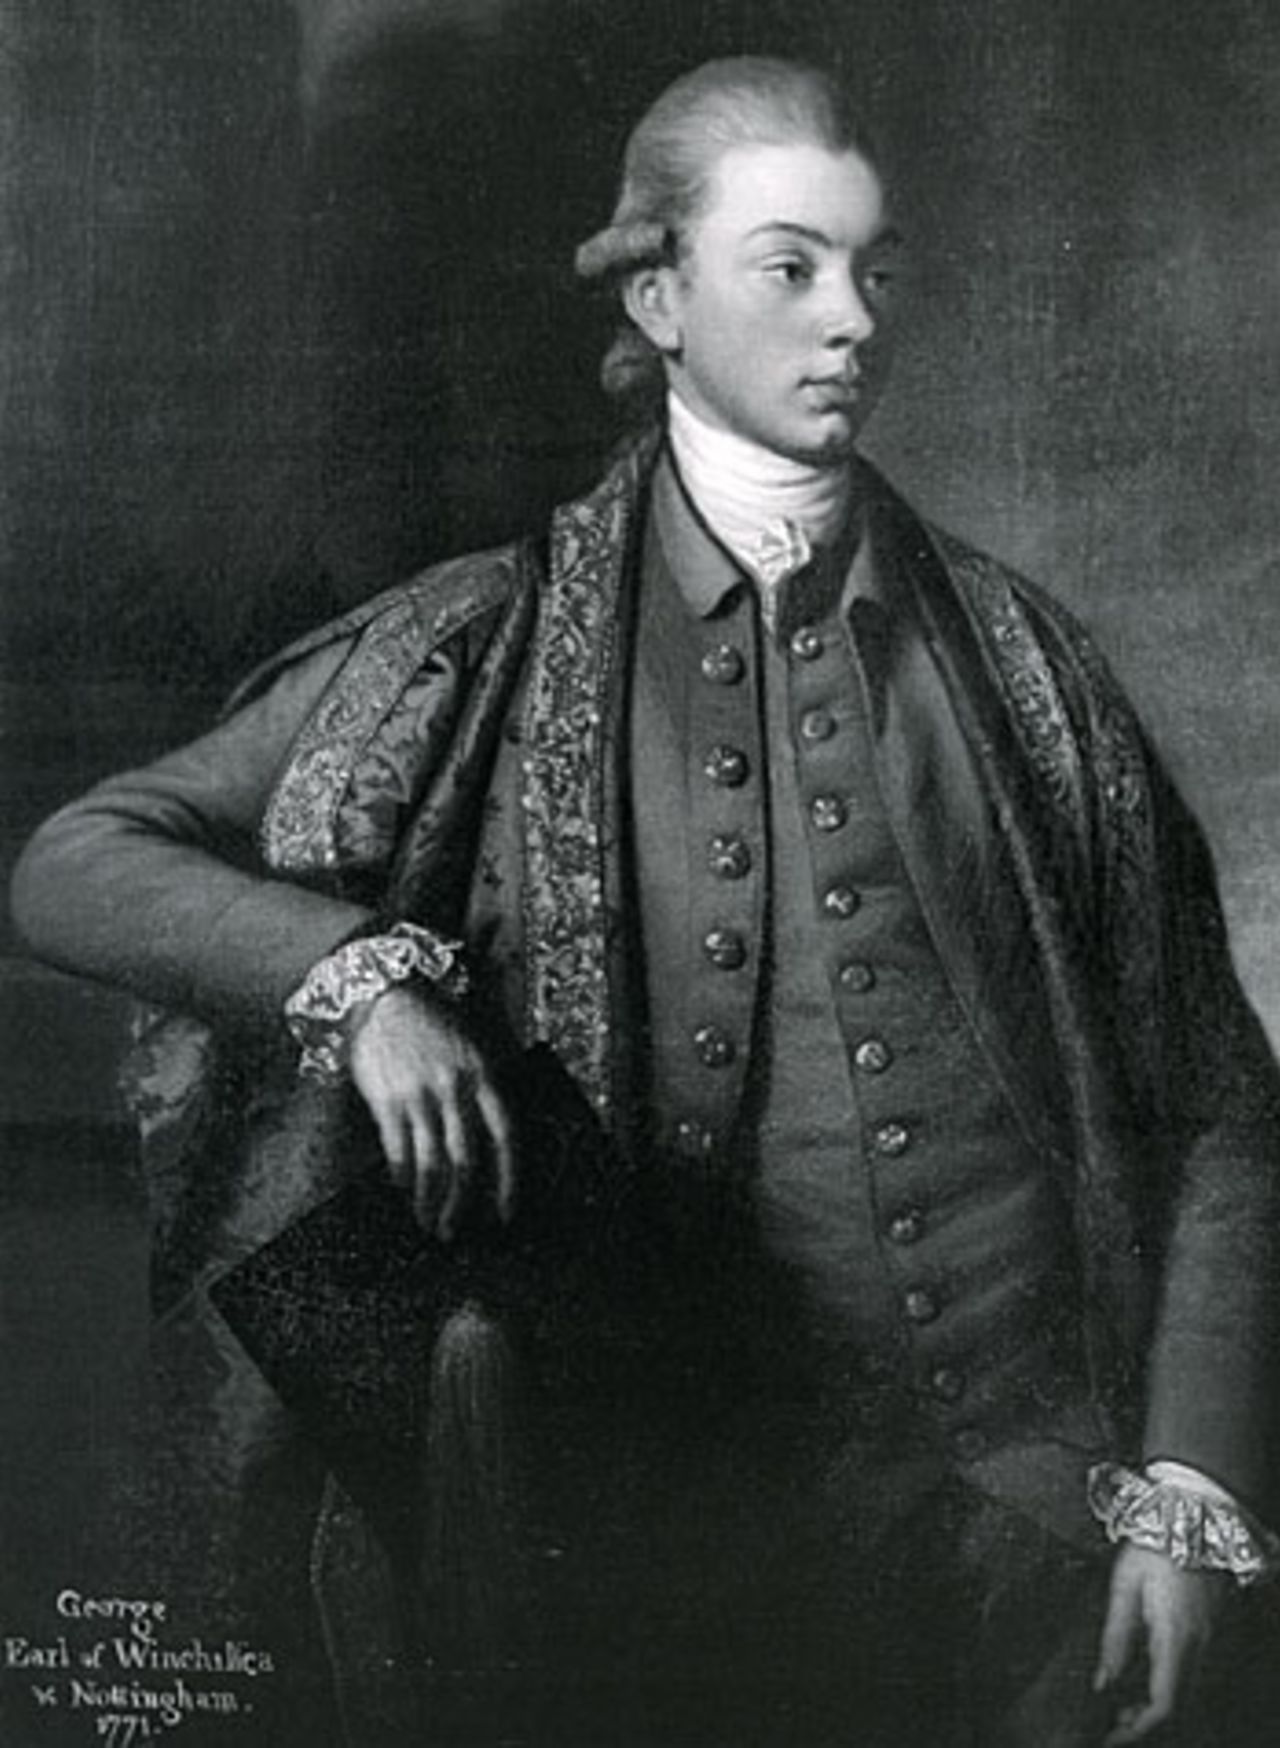 The Earl of Winchelsea, regarded as the founder of the MCC